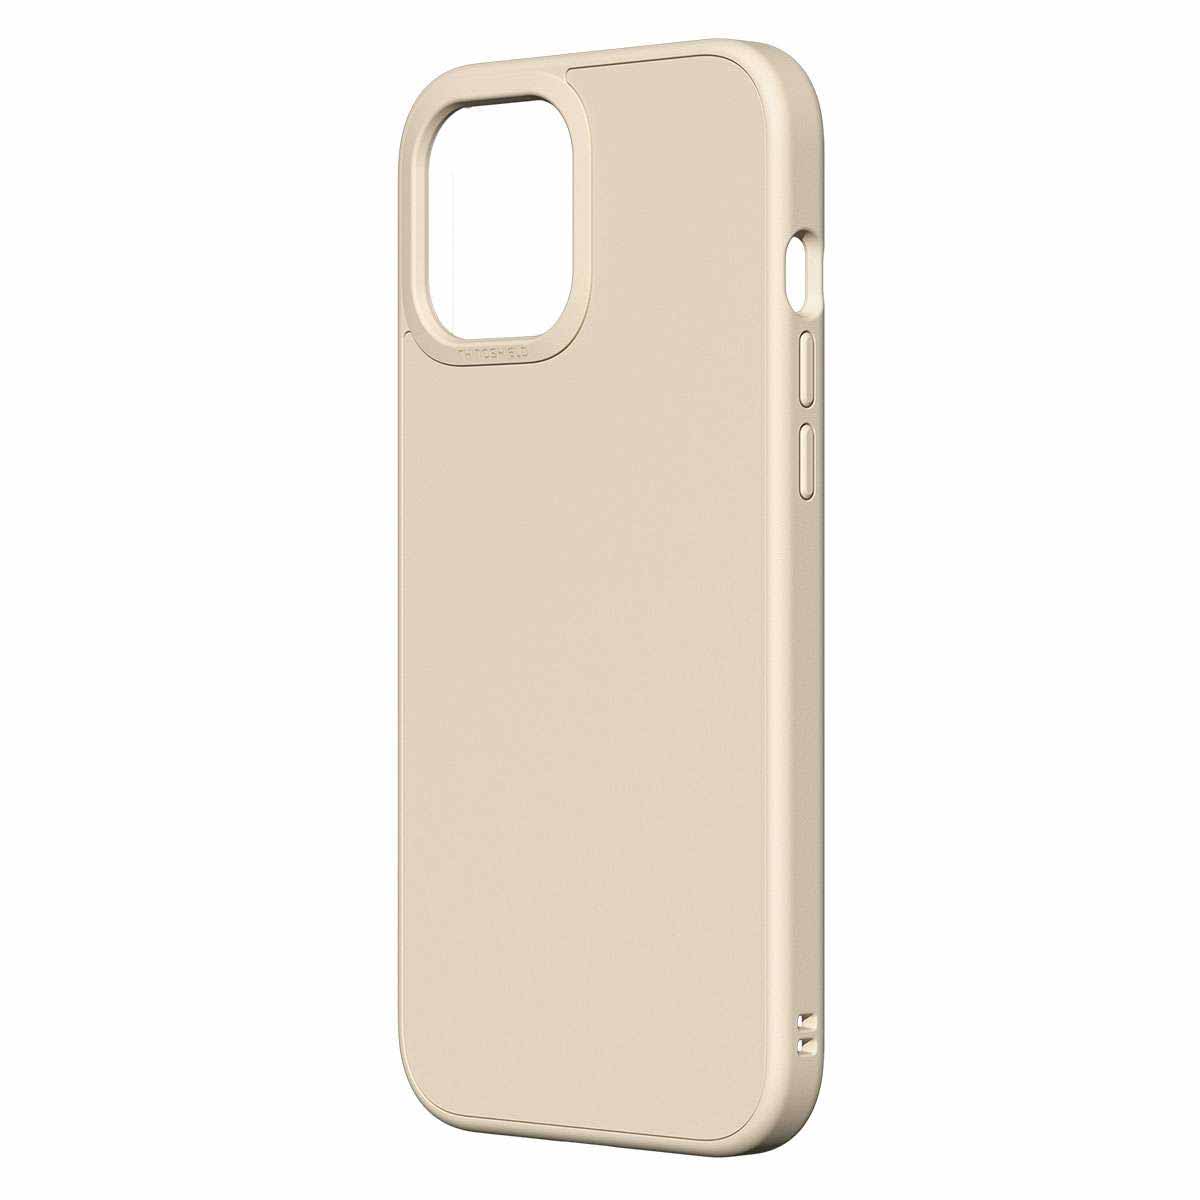 RhinoShield SolidSuit Case for iPhone 12 Pro Max SSA0118749 B&H